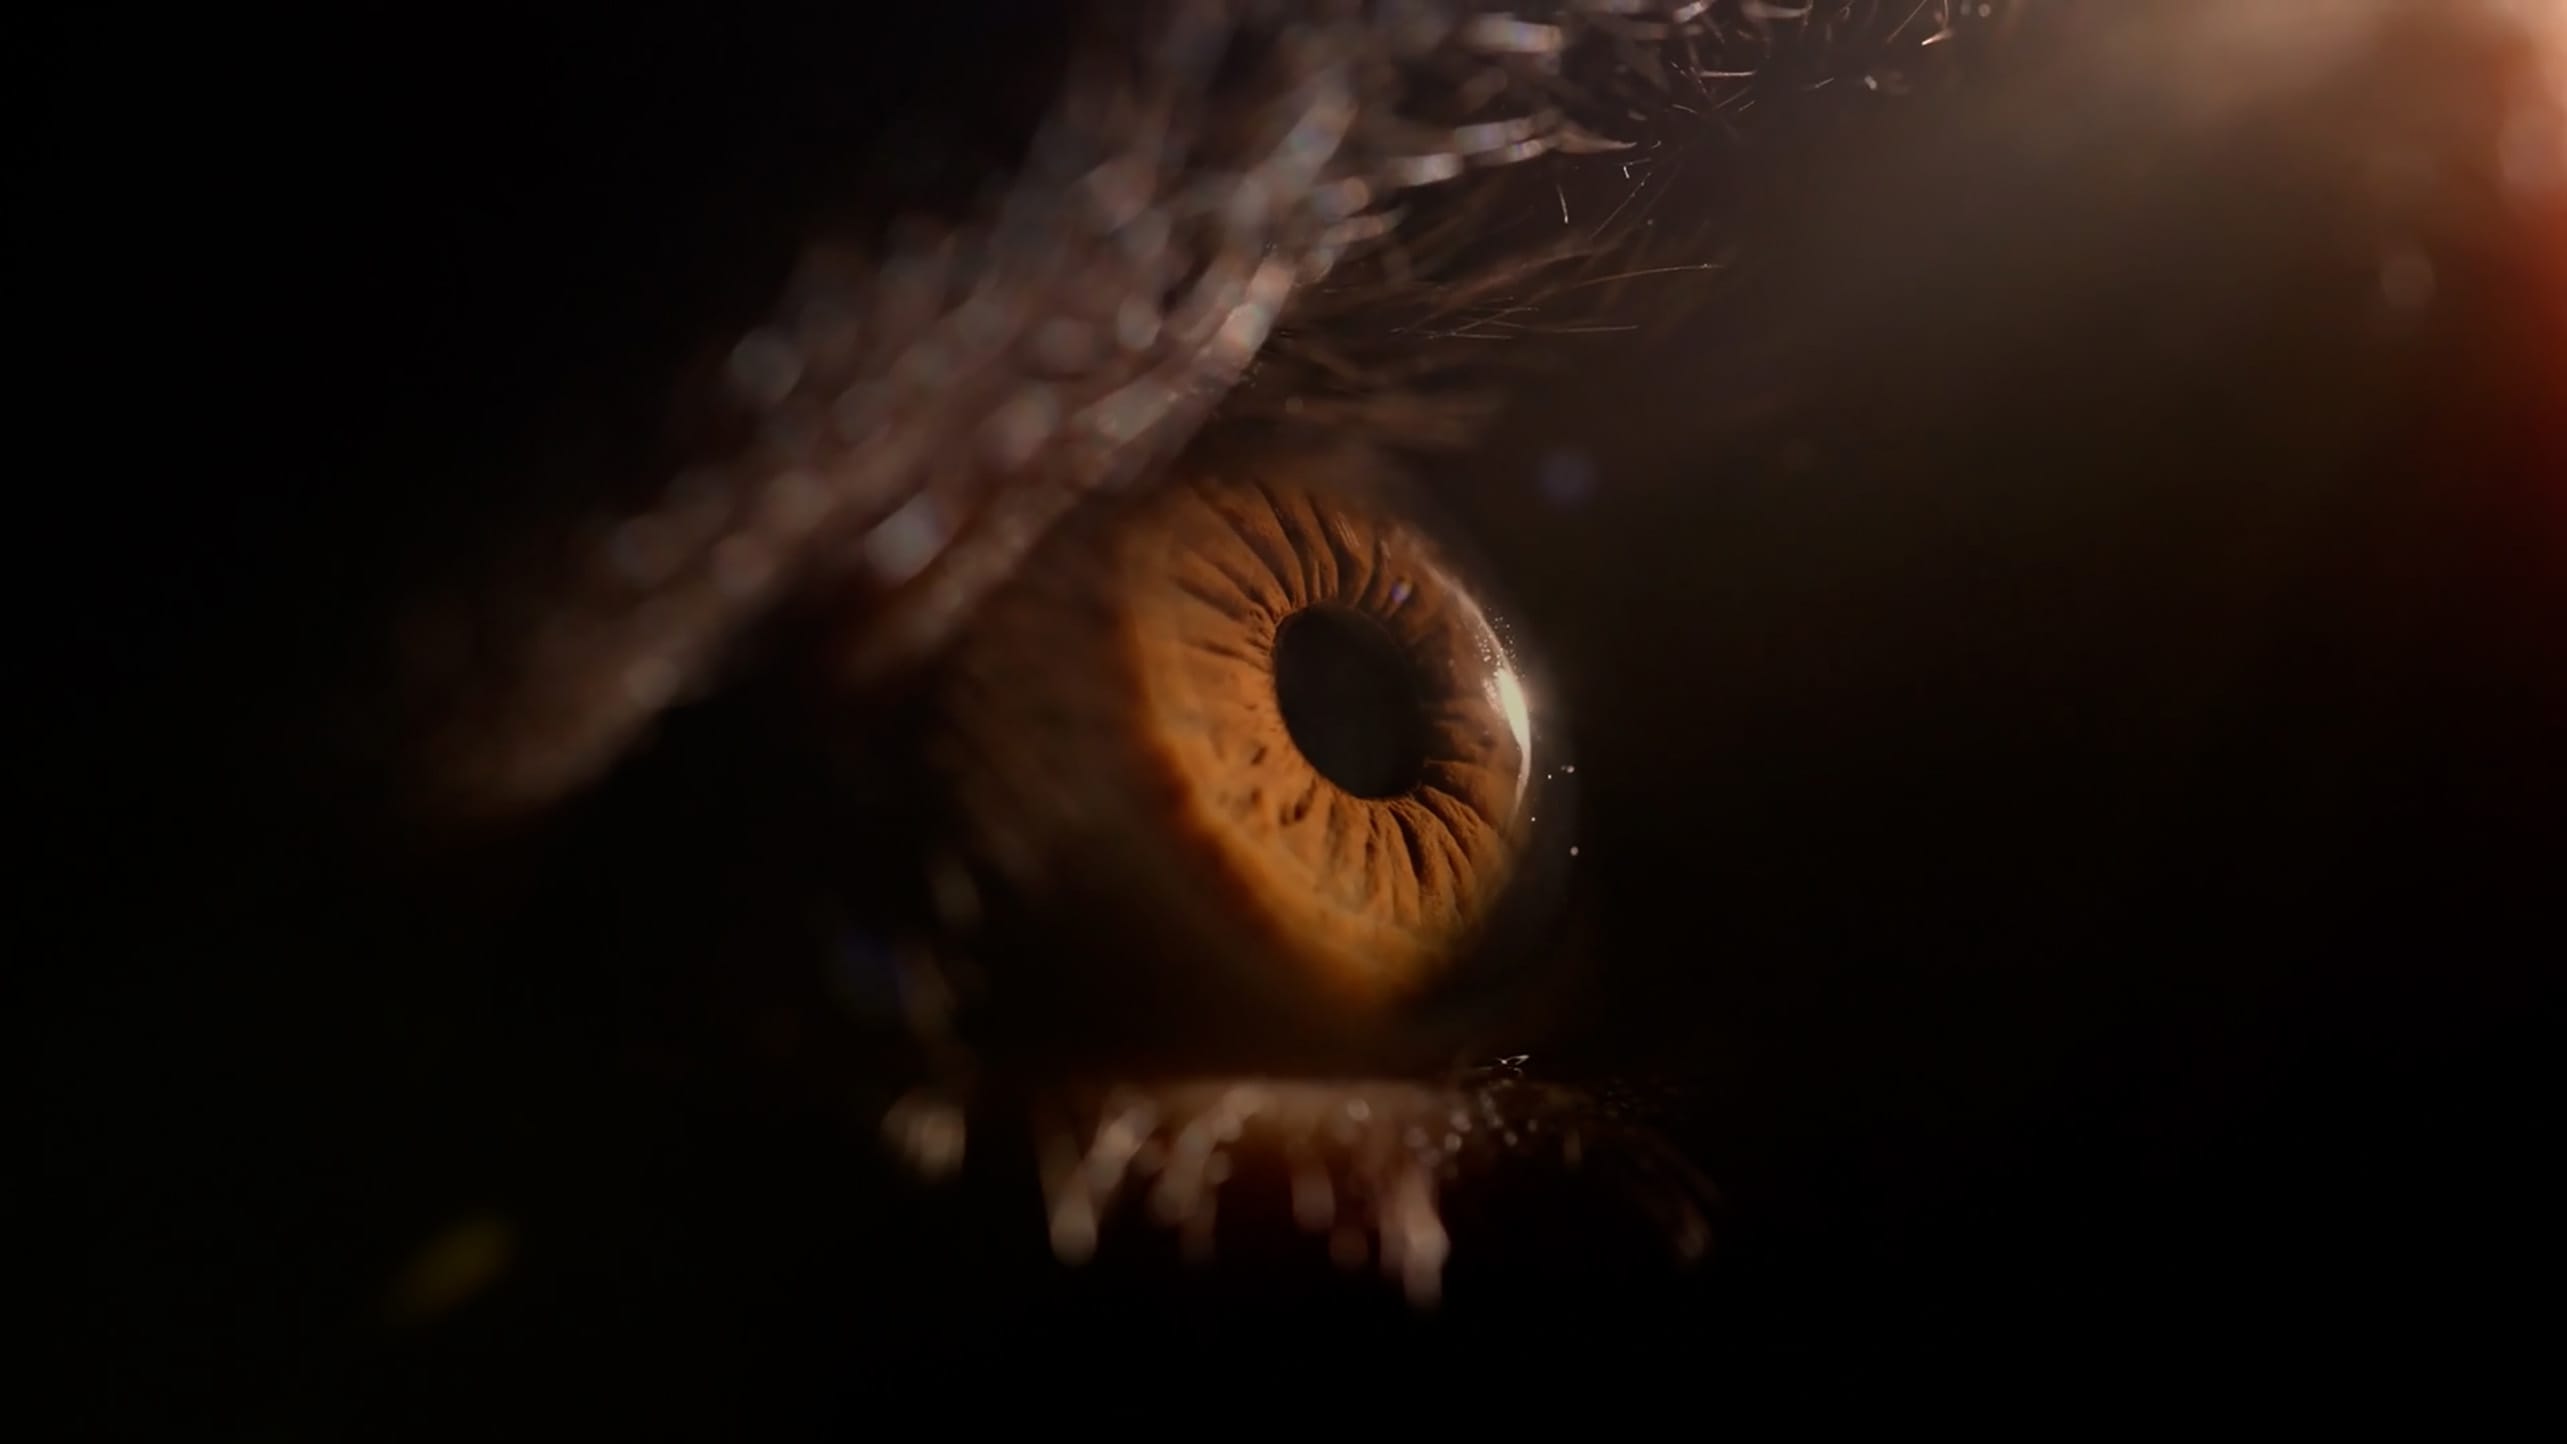 An extreme closeup shot of an eye with a brown iris on a dark background looking toward a single light source.